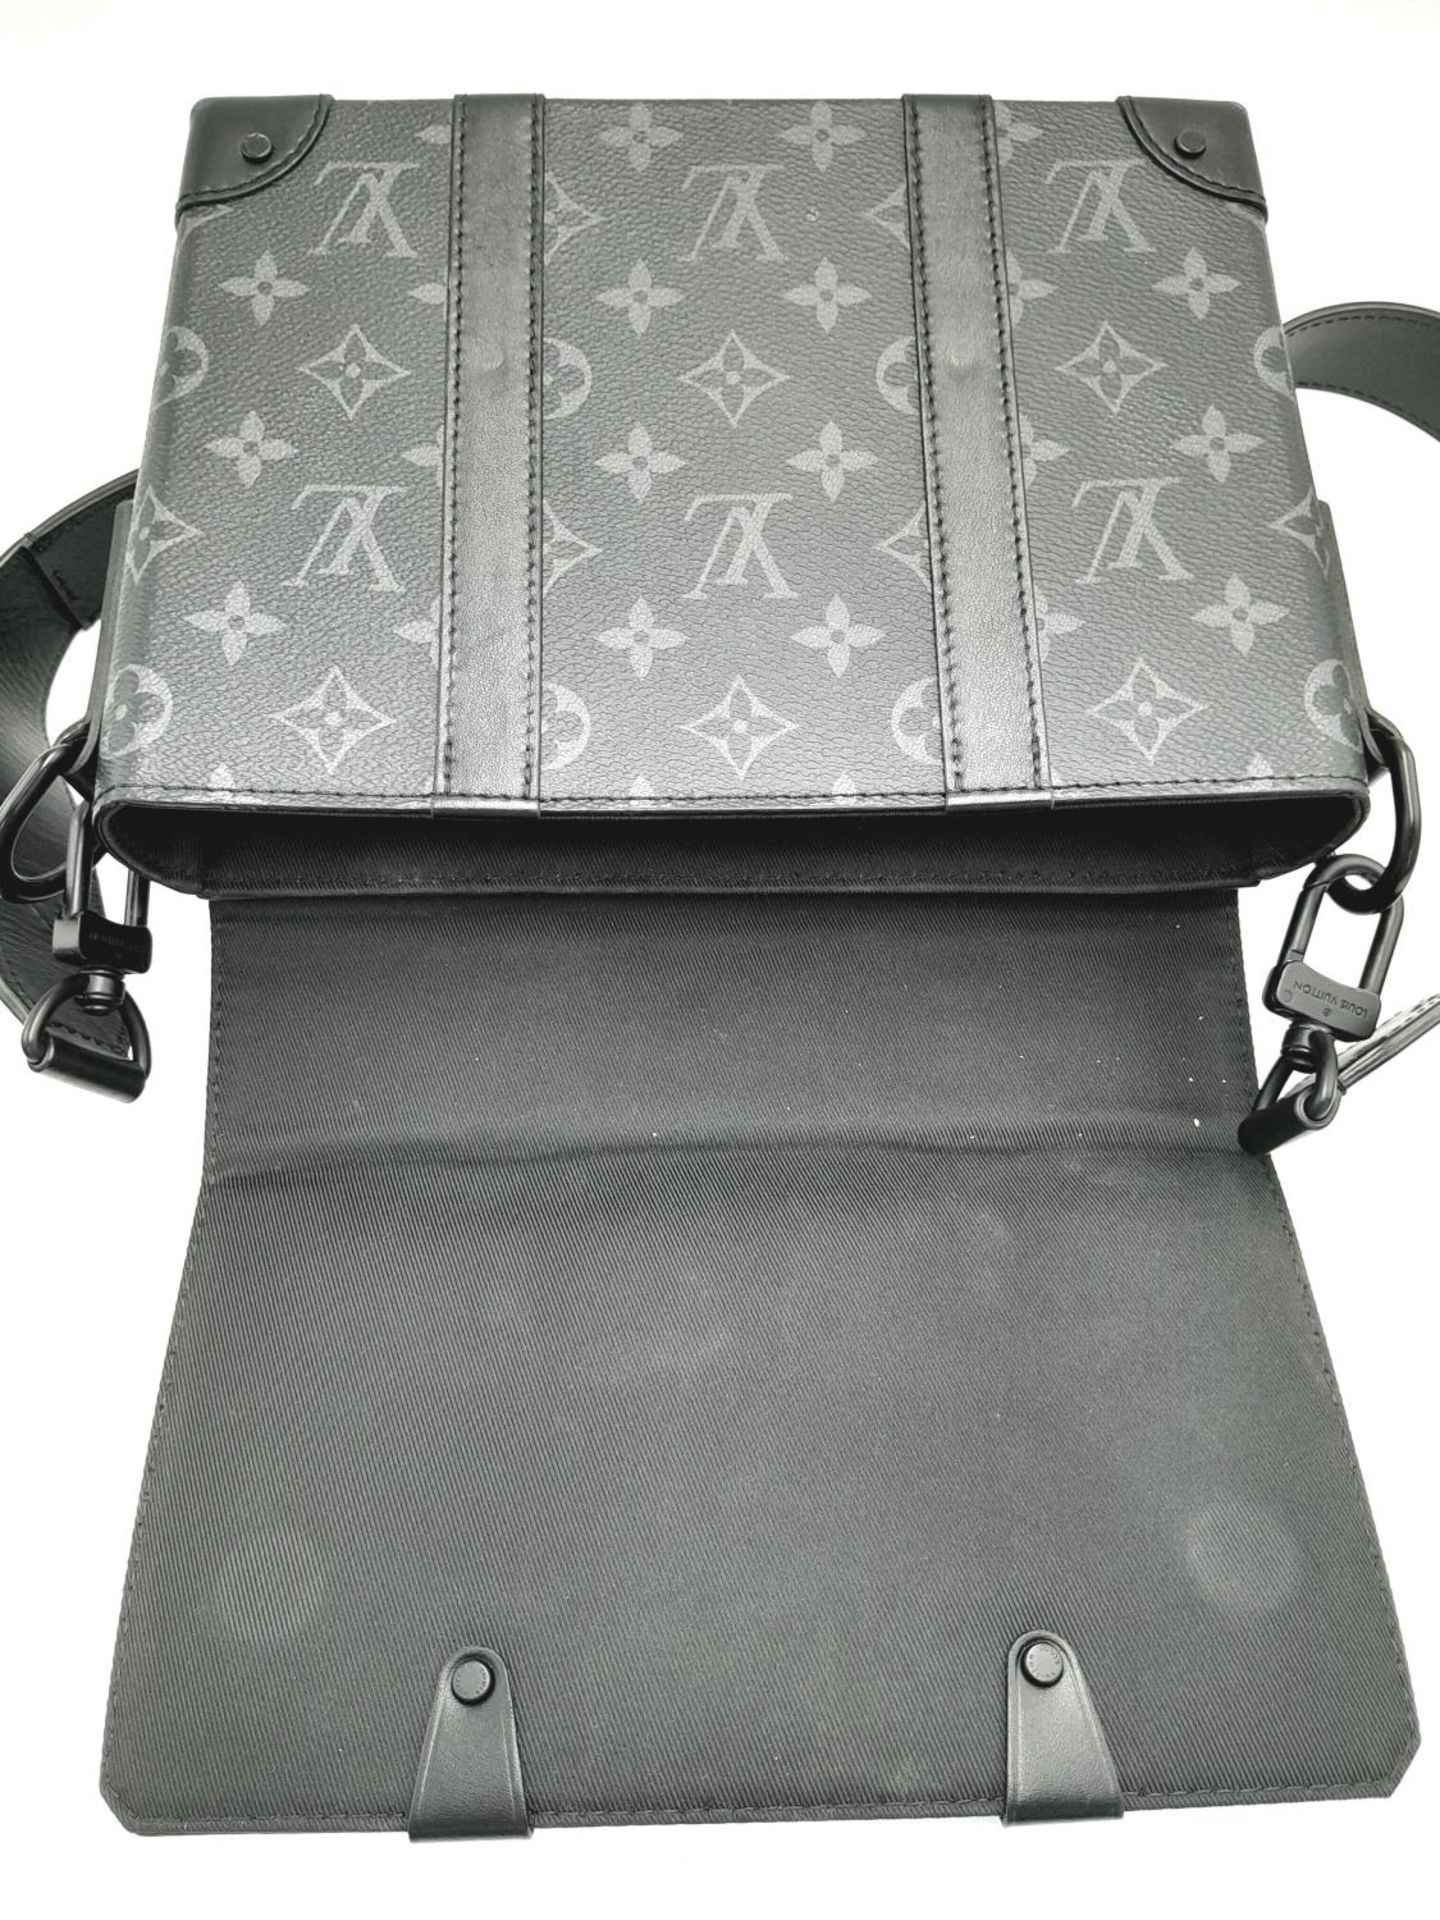 A Louis Vuitton Black Eclipse Trunk Messenger Bag. Monogramed canvas exterior with black-toned - Image 2 of 10